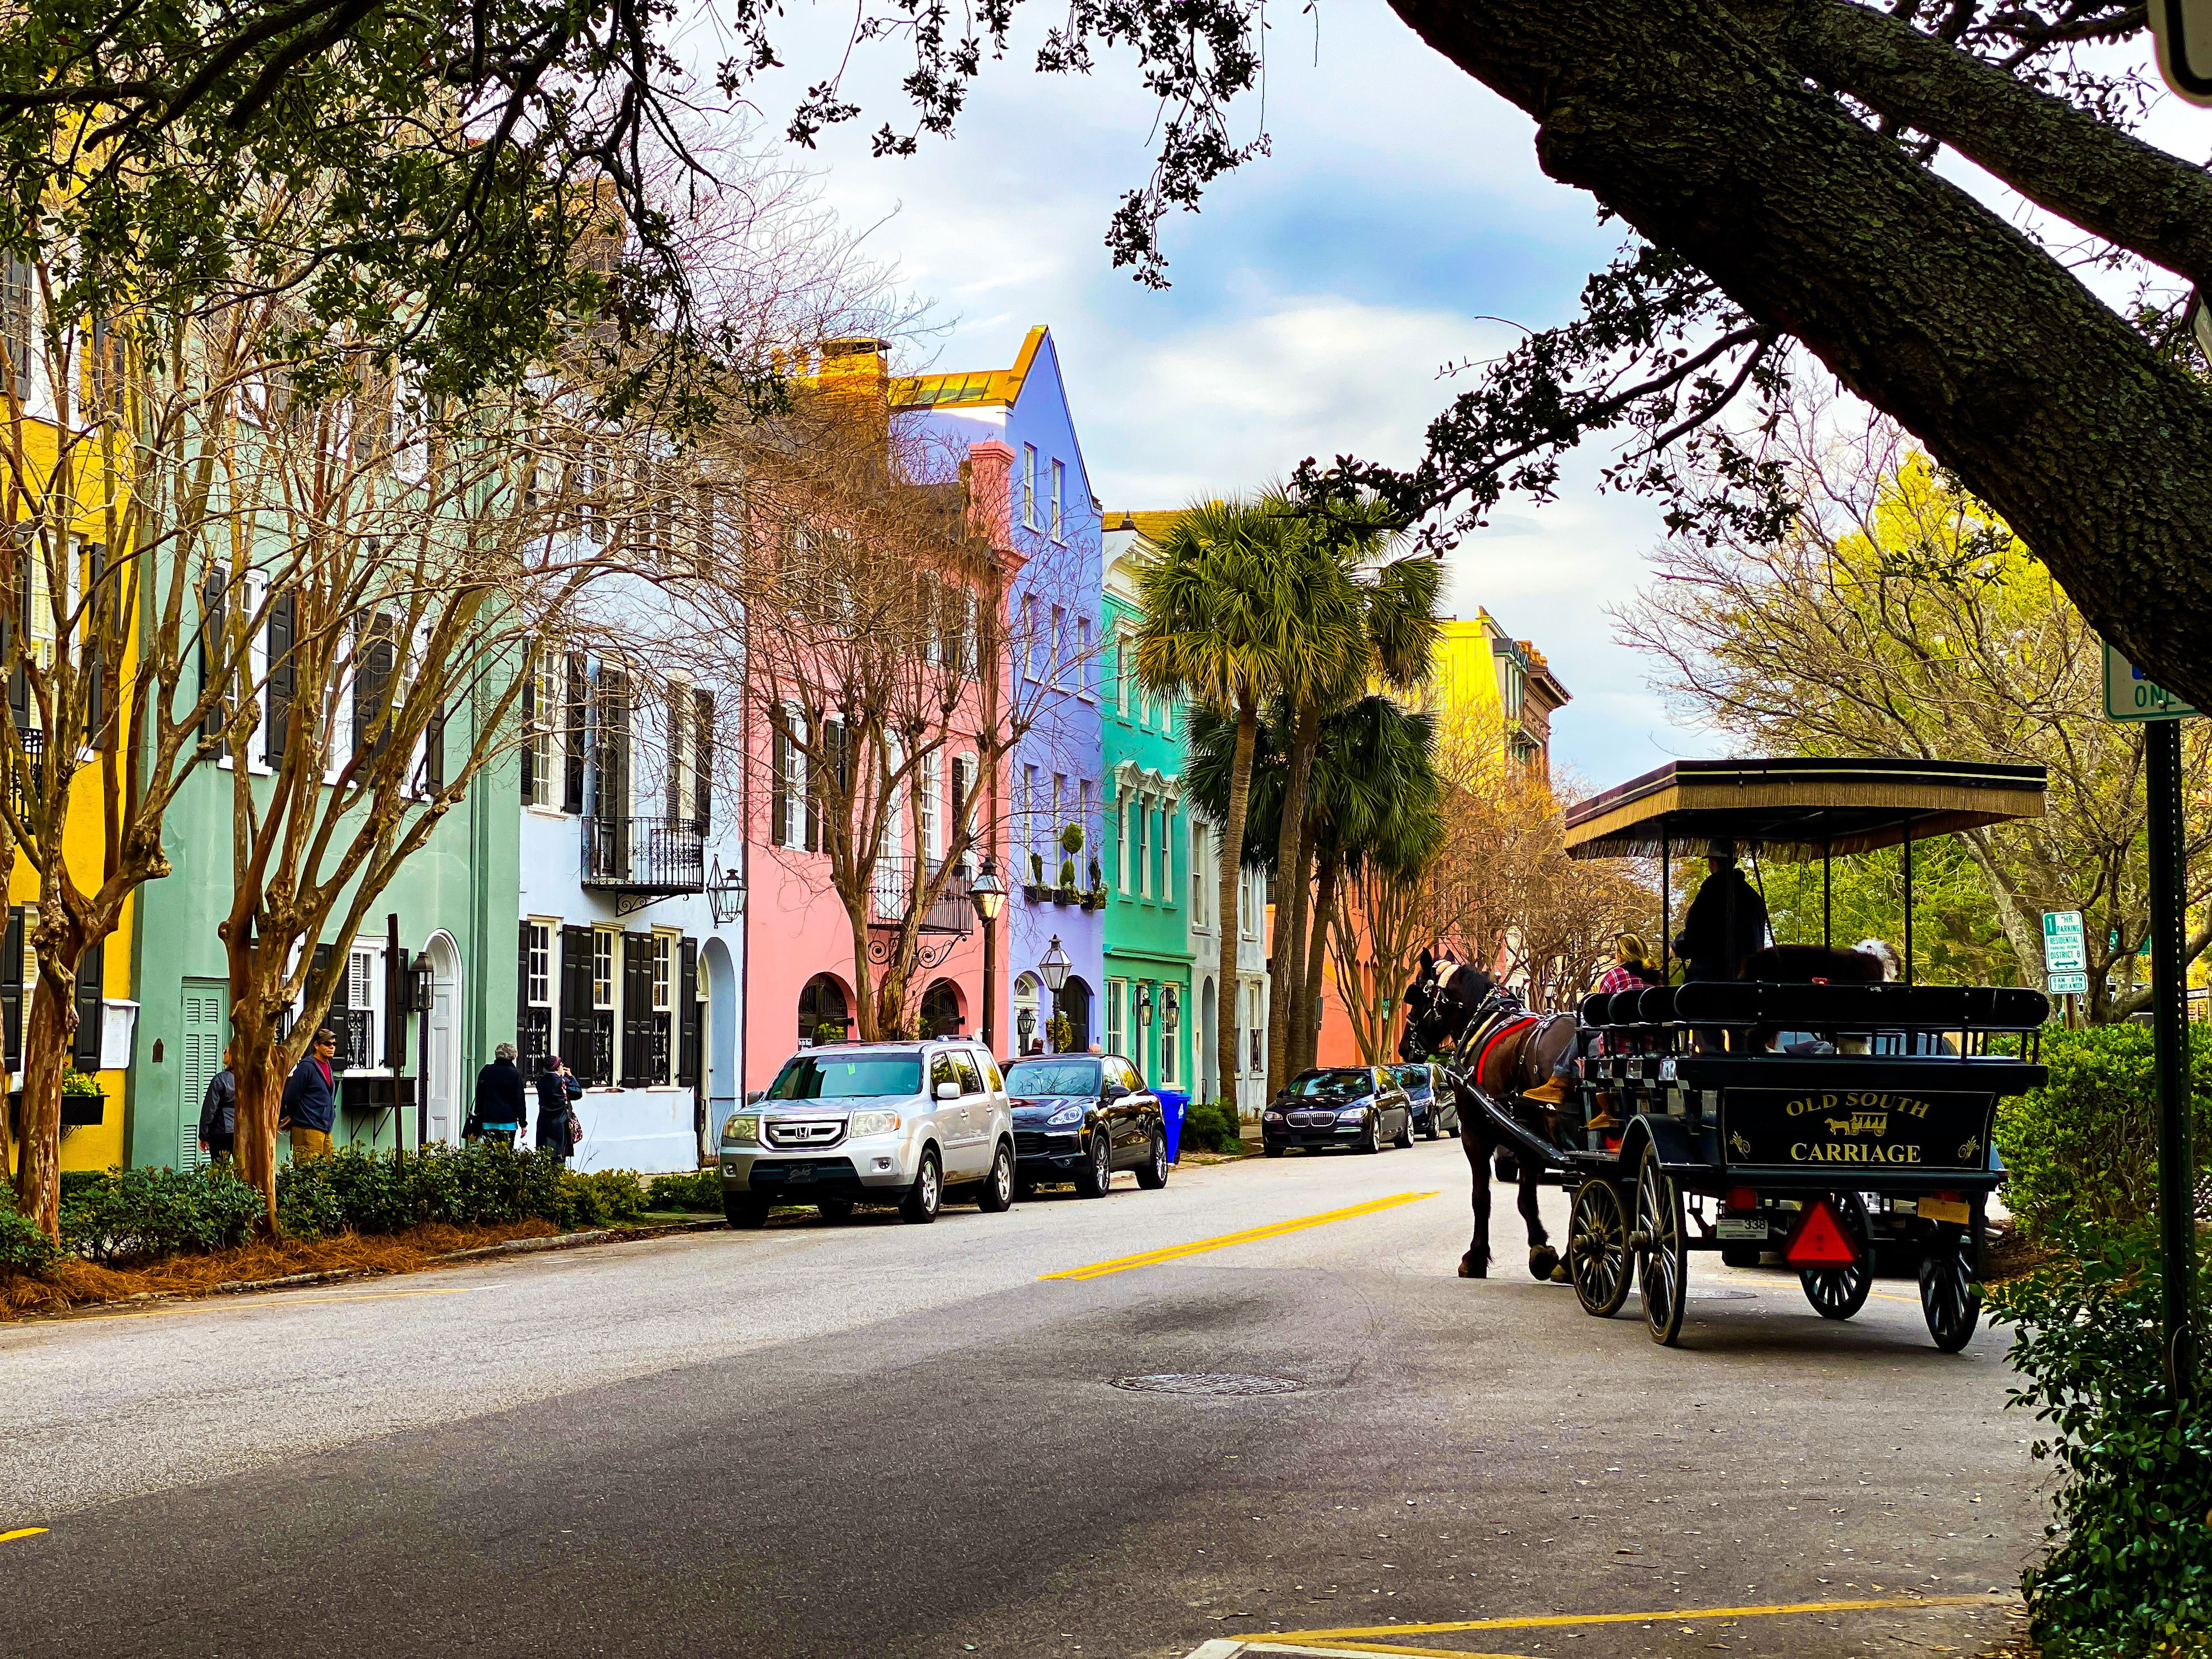 <p>Charleston is a town known for its rich history, southern charm, and vibrant culture. This hidden gem leaves a lasting impression on visitors.</p><p>The historic district is meticulously preserved with pastel-colored old homes and cobblestone streets.</p><p><strong>Highlights:</strong> Gallah culture, Lowcountry cuisine, Barrier islands</p><p><strong>Activities to Enjoy:</strong> Photography, shopping, boat tours</p>